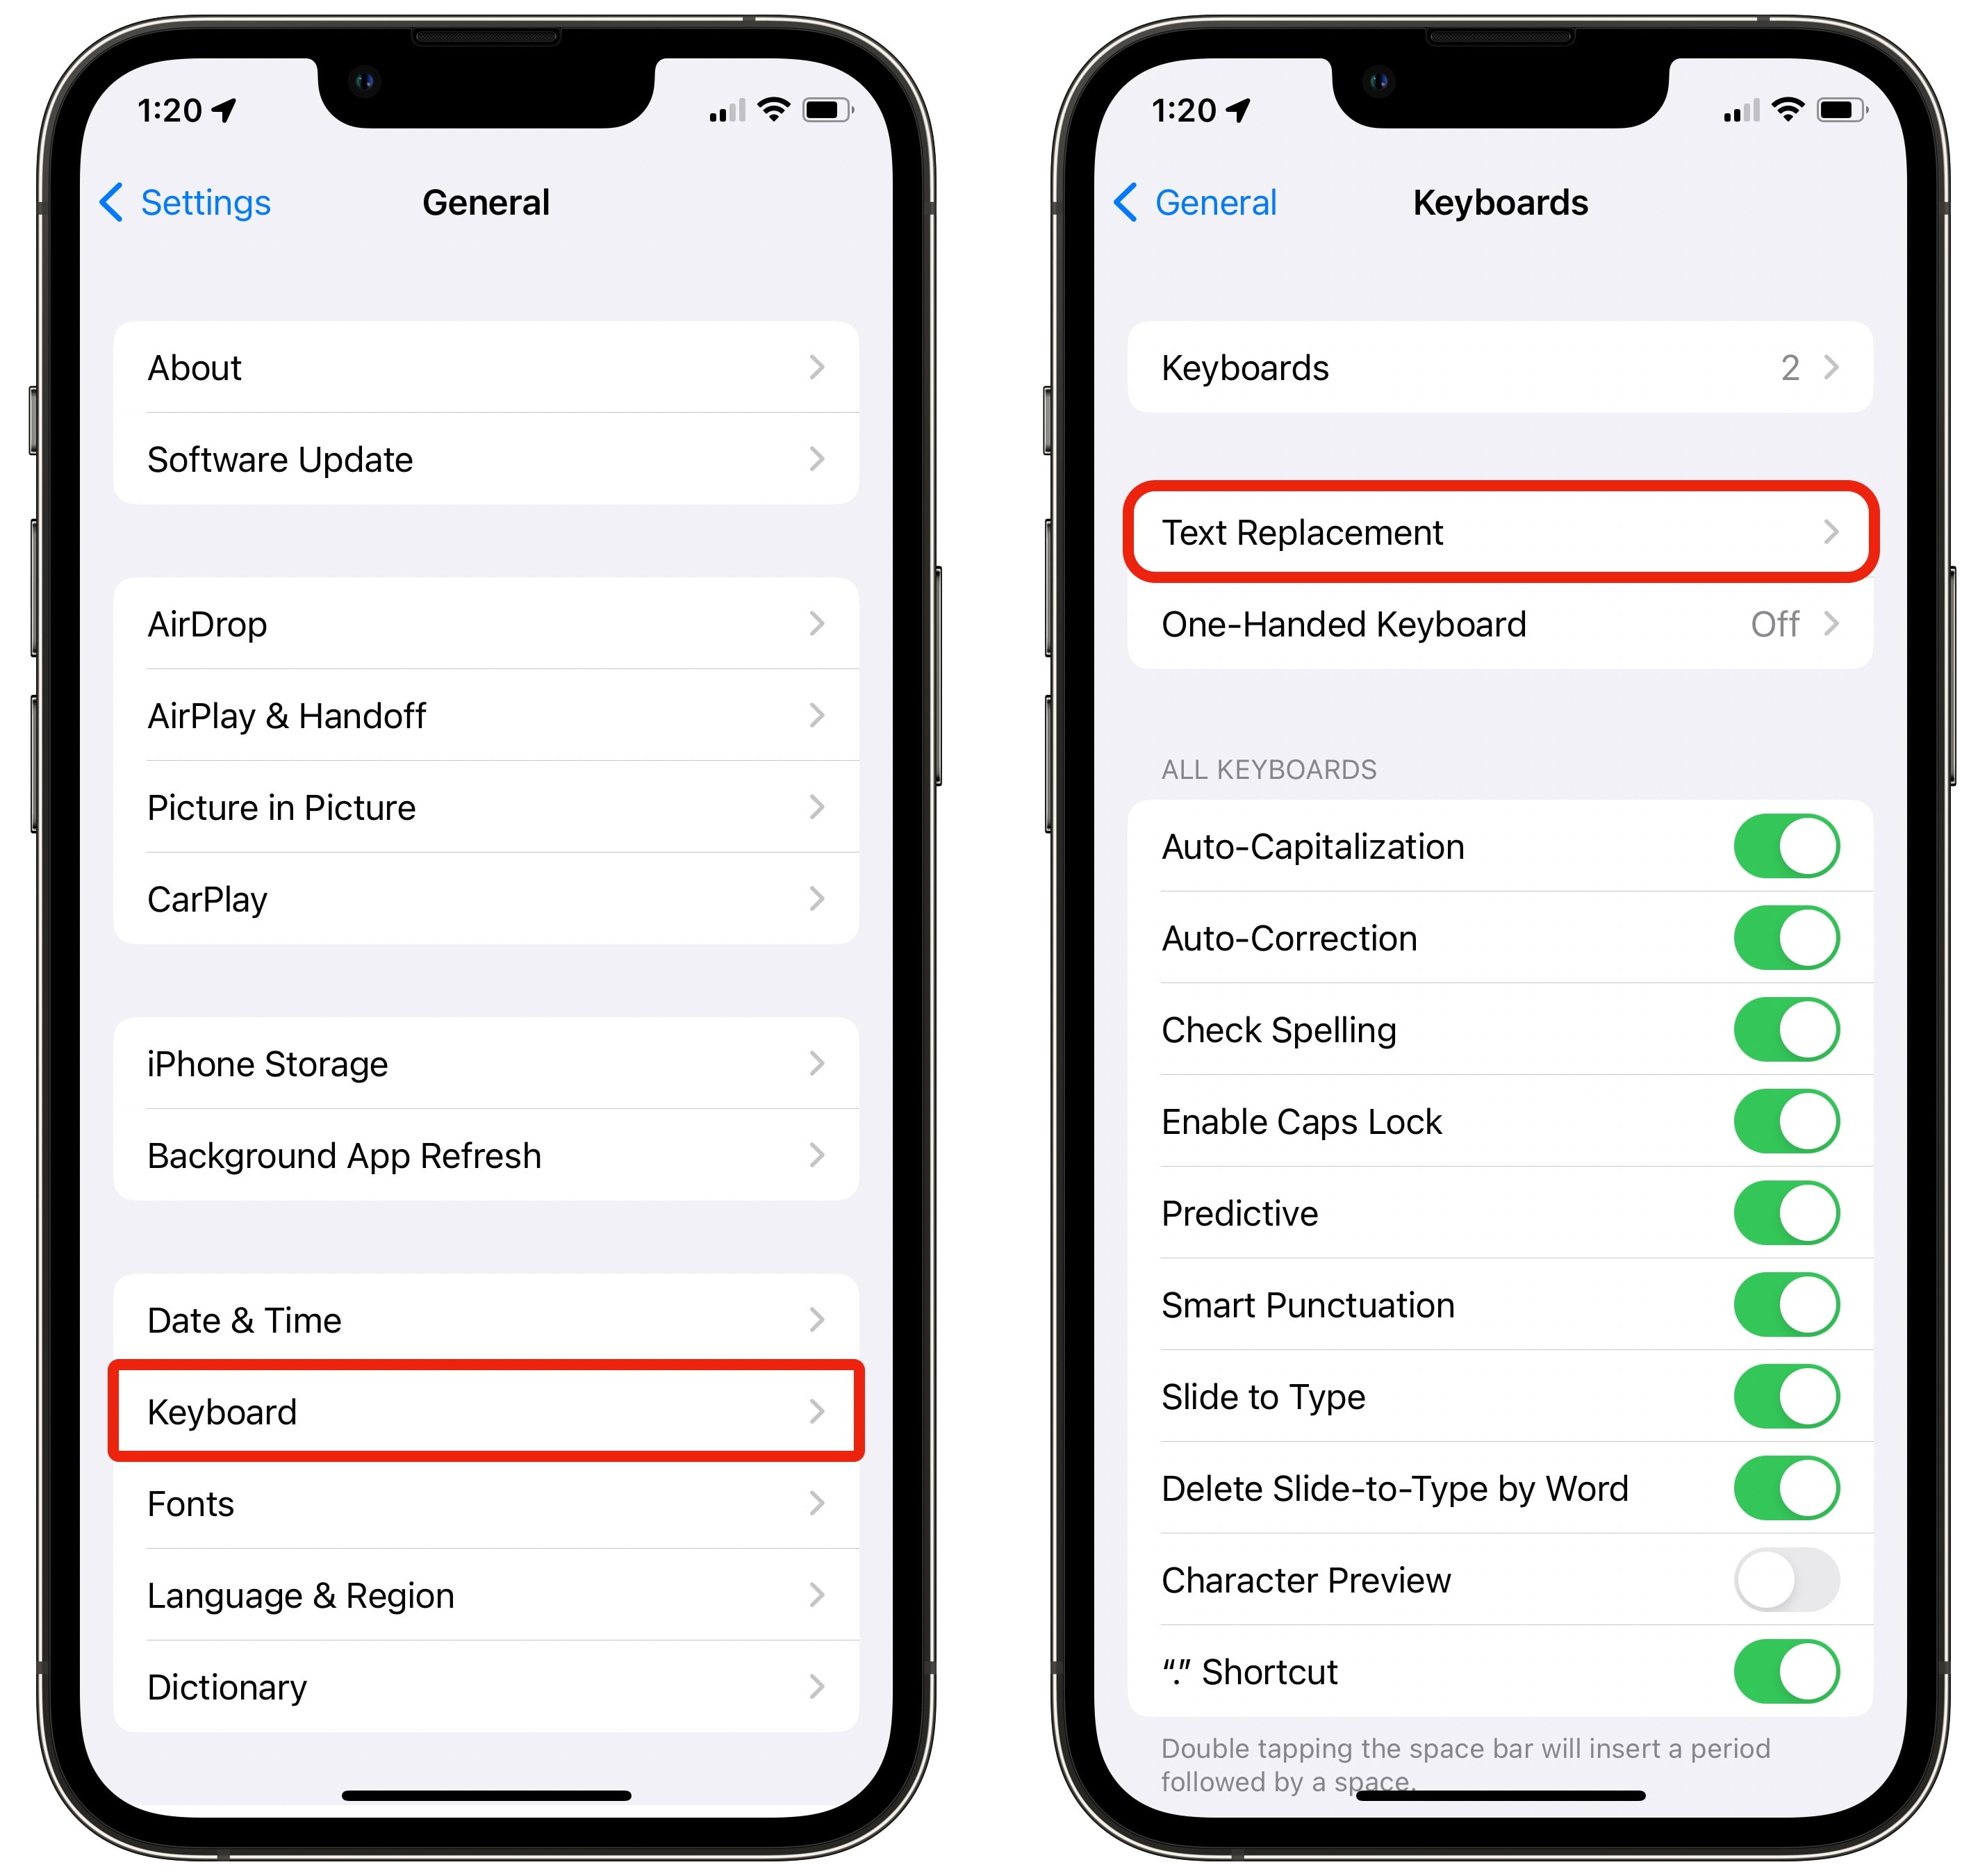 Find Text Replacement in Settings